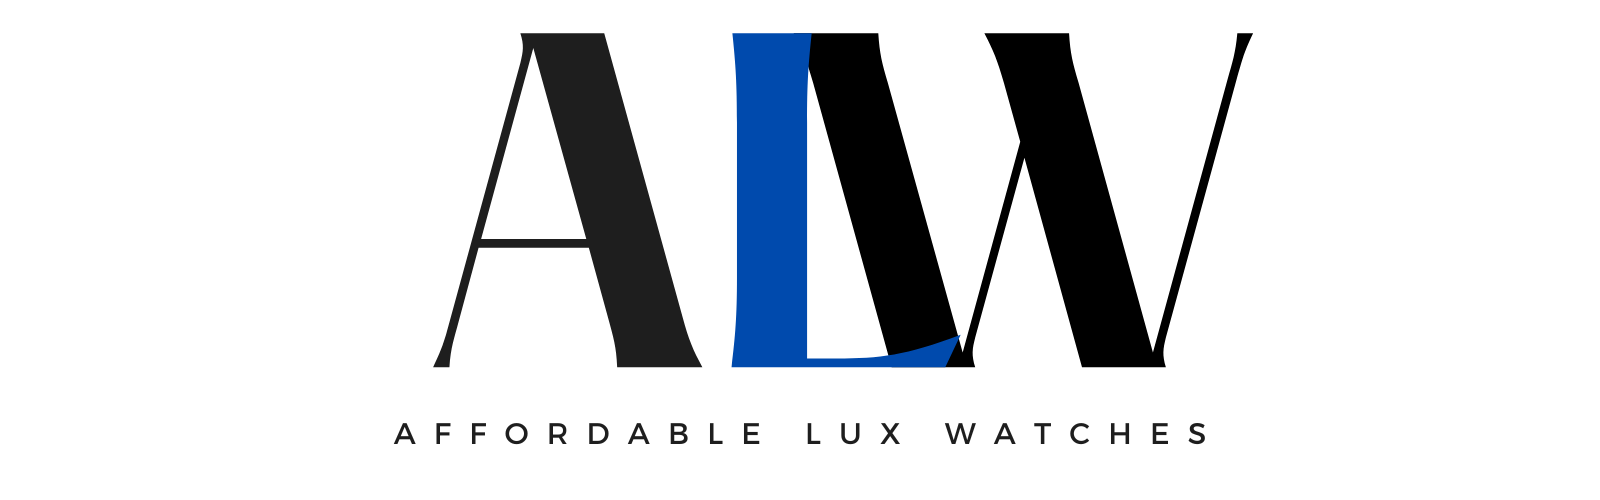 Affordable Lux Watches